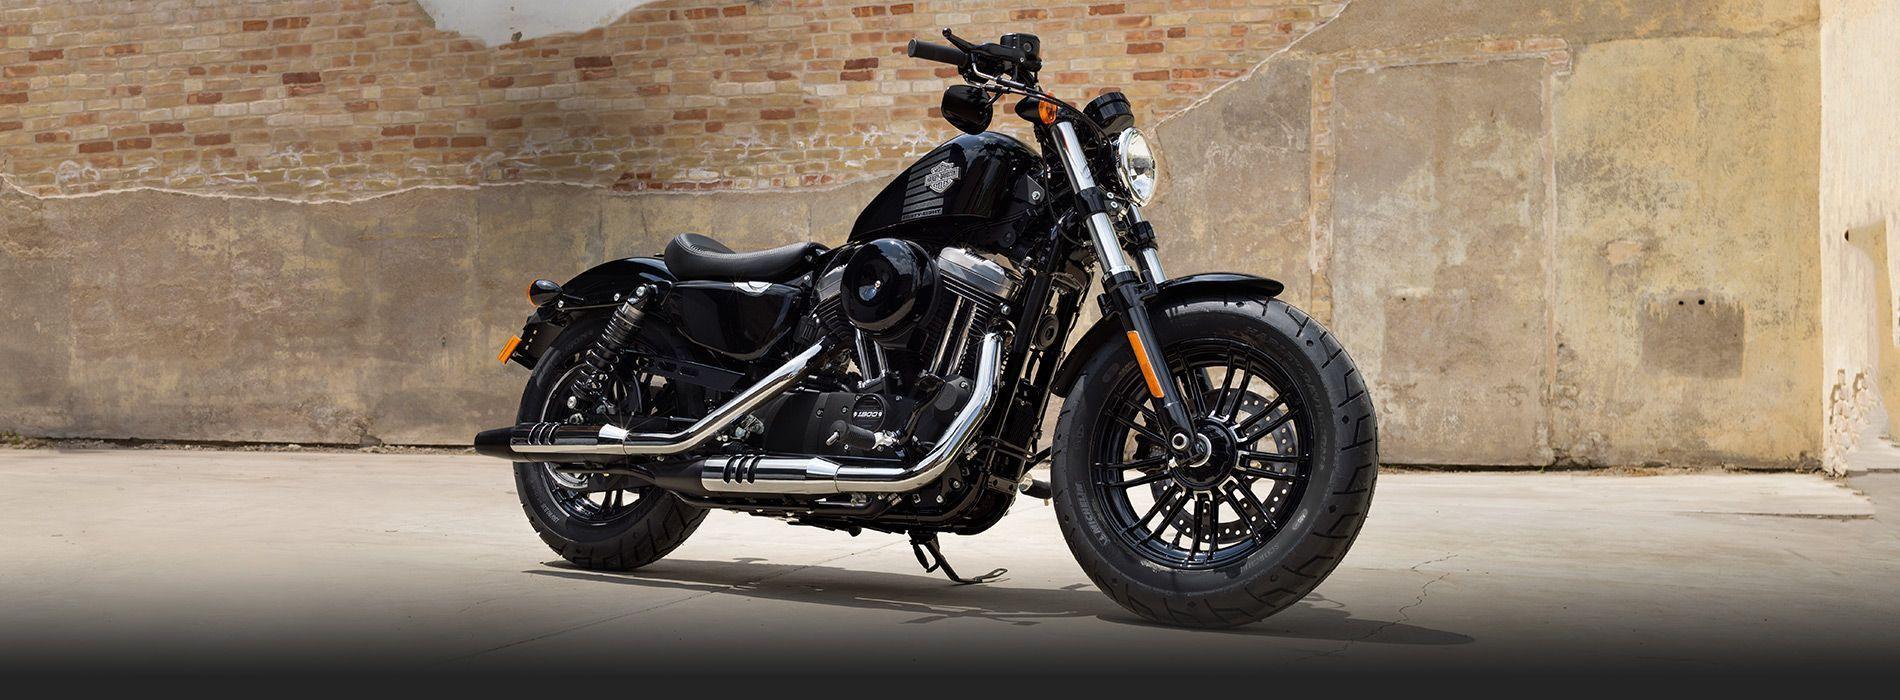 Sportster Forty Eight. Harley Davidson India